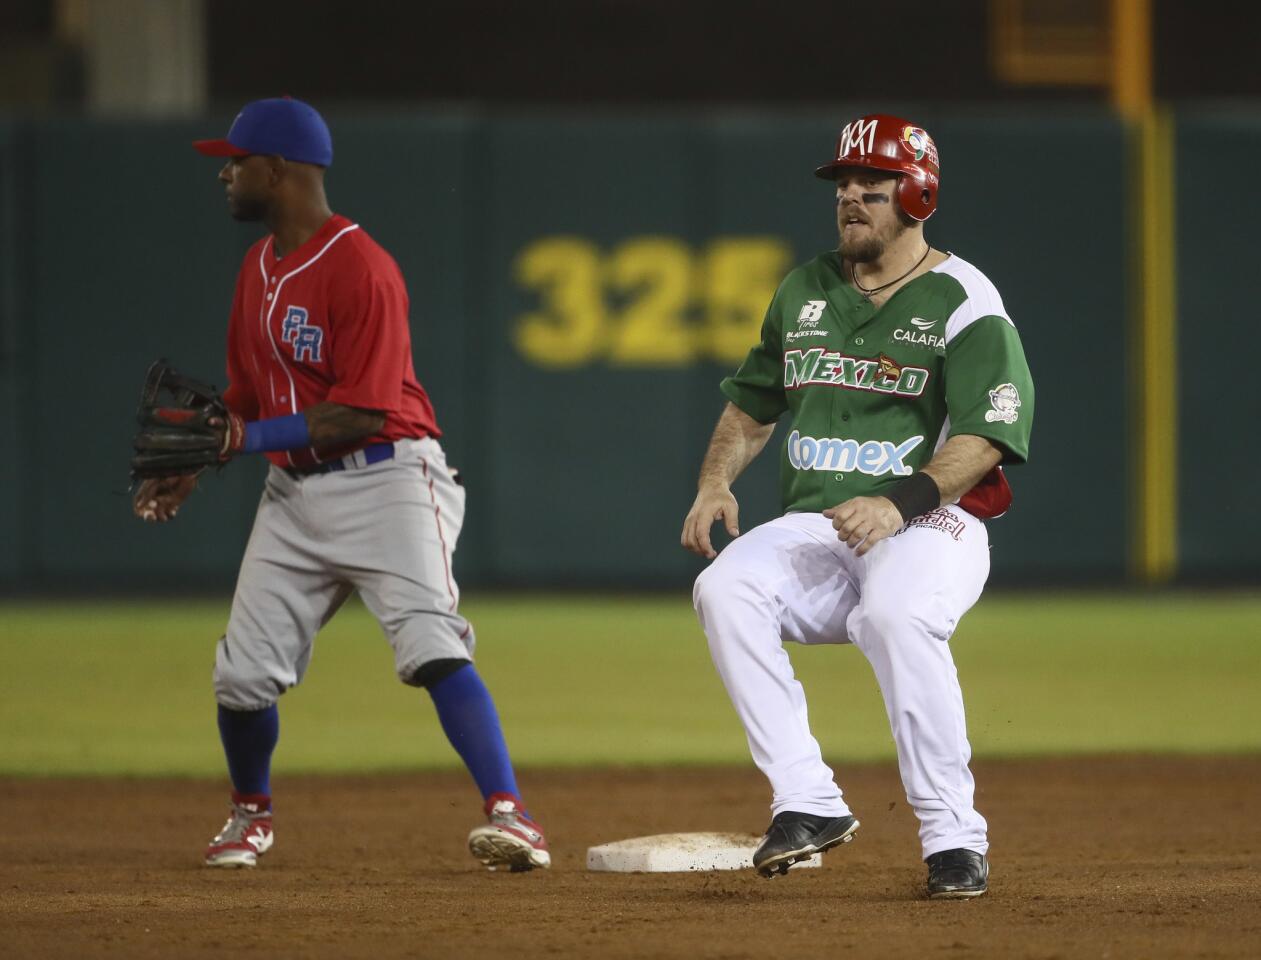 C.J. Retherford of Mexico's Aguilas de Mexicali on second base in a Caribbean Series game against Puerto Rico, in Culiacan, Mexico, Wednesday, Feb. 1, 2017. (AP Photo/Luis Gutierrez)